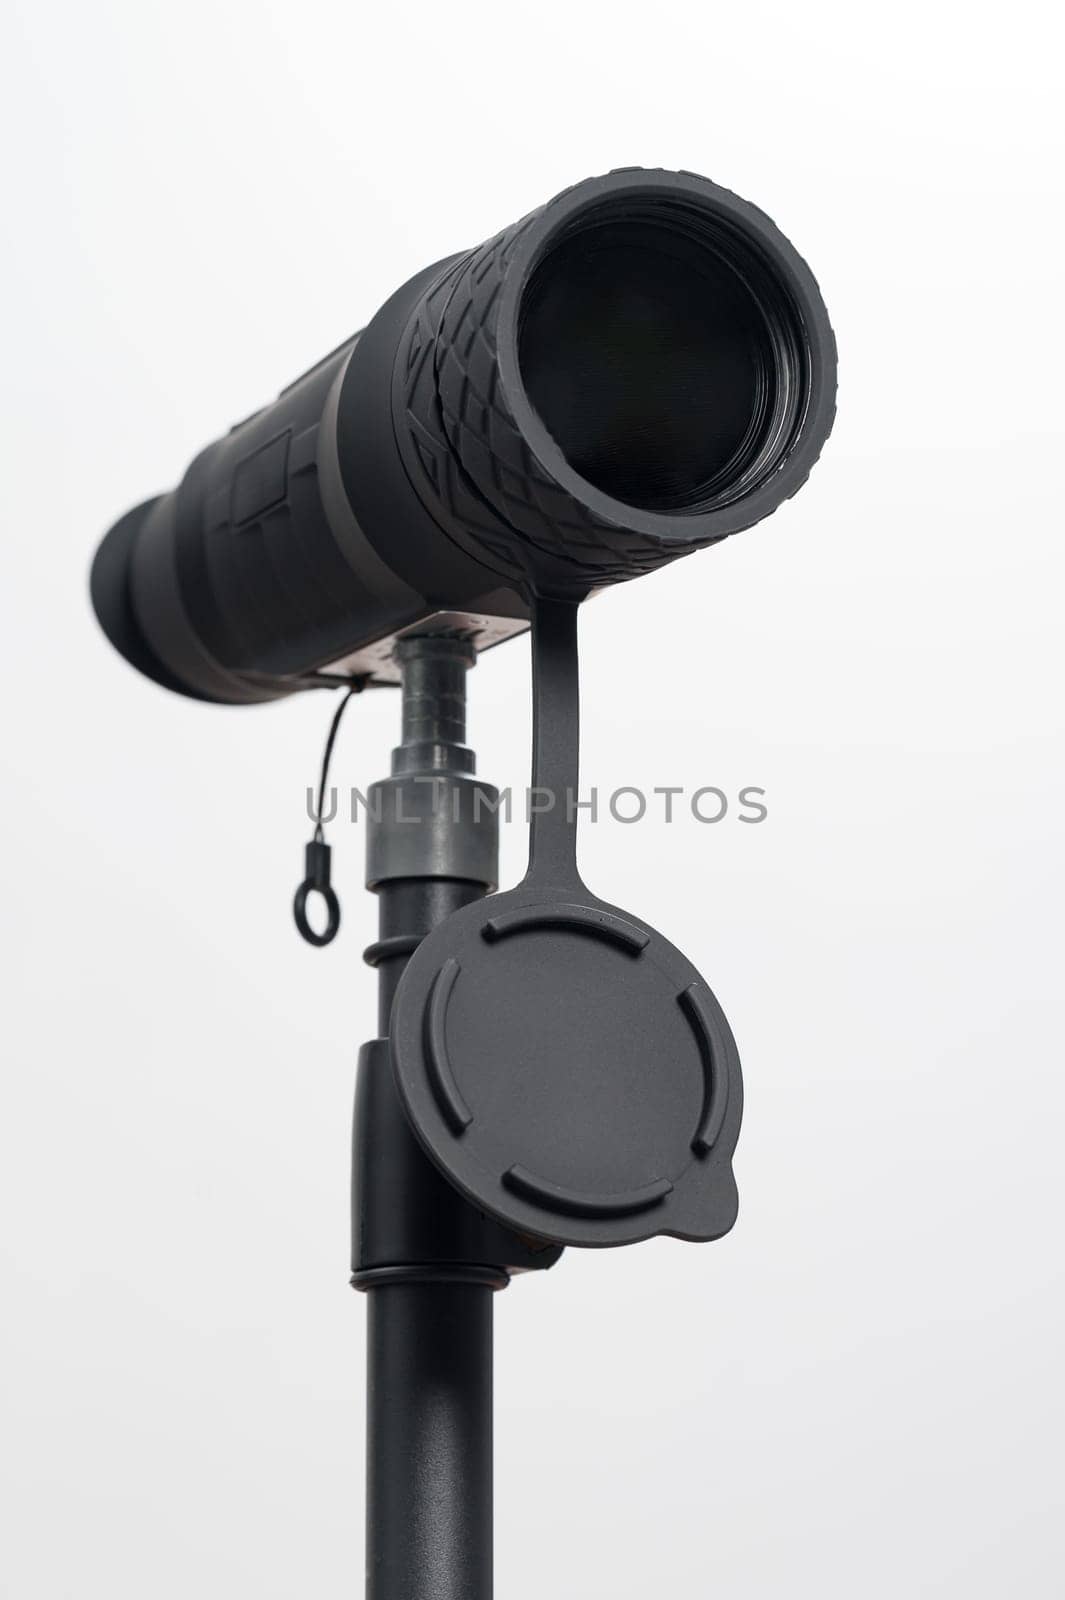 Monocular on a tripod isolated on a white field. by Niko_Cingaryuk